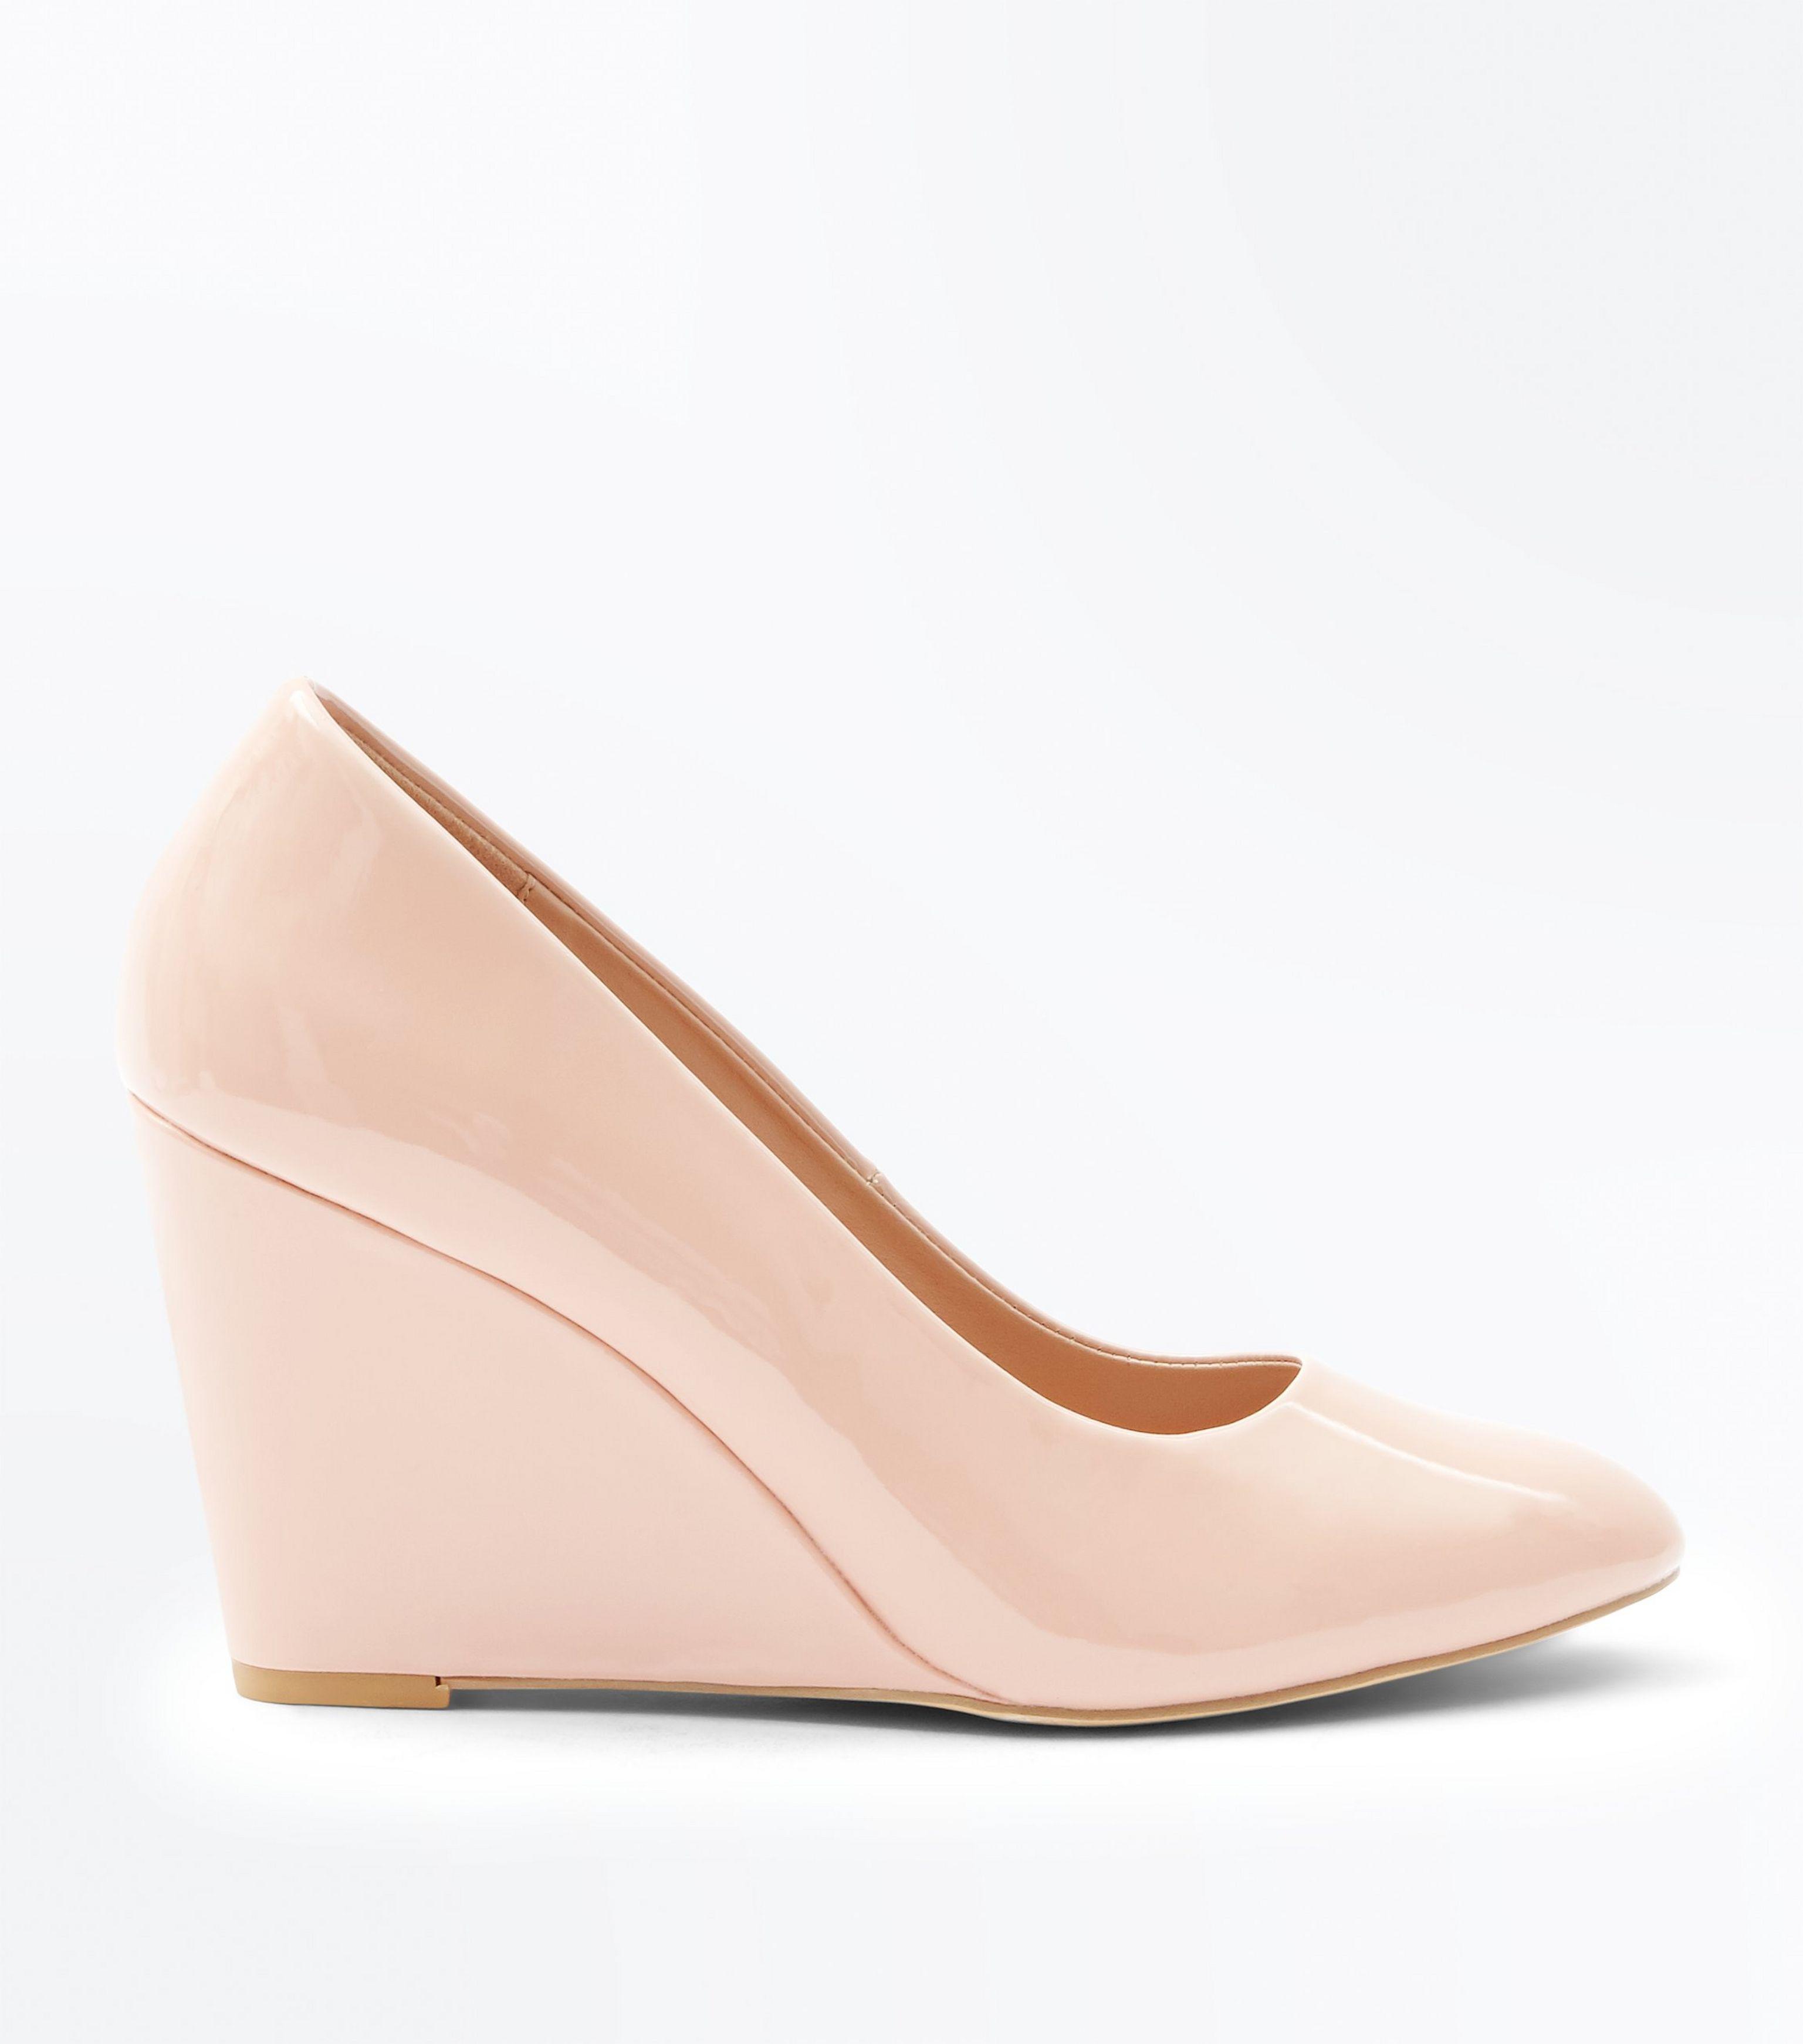 New Look Nude Patent Wedge Heels in Natural - Lyst